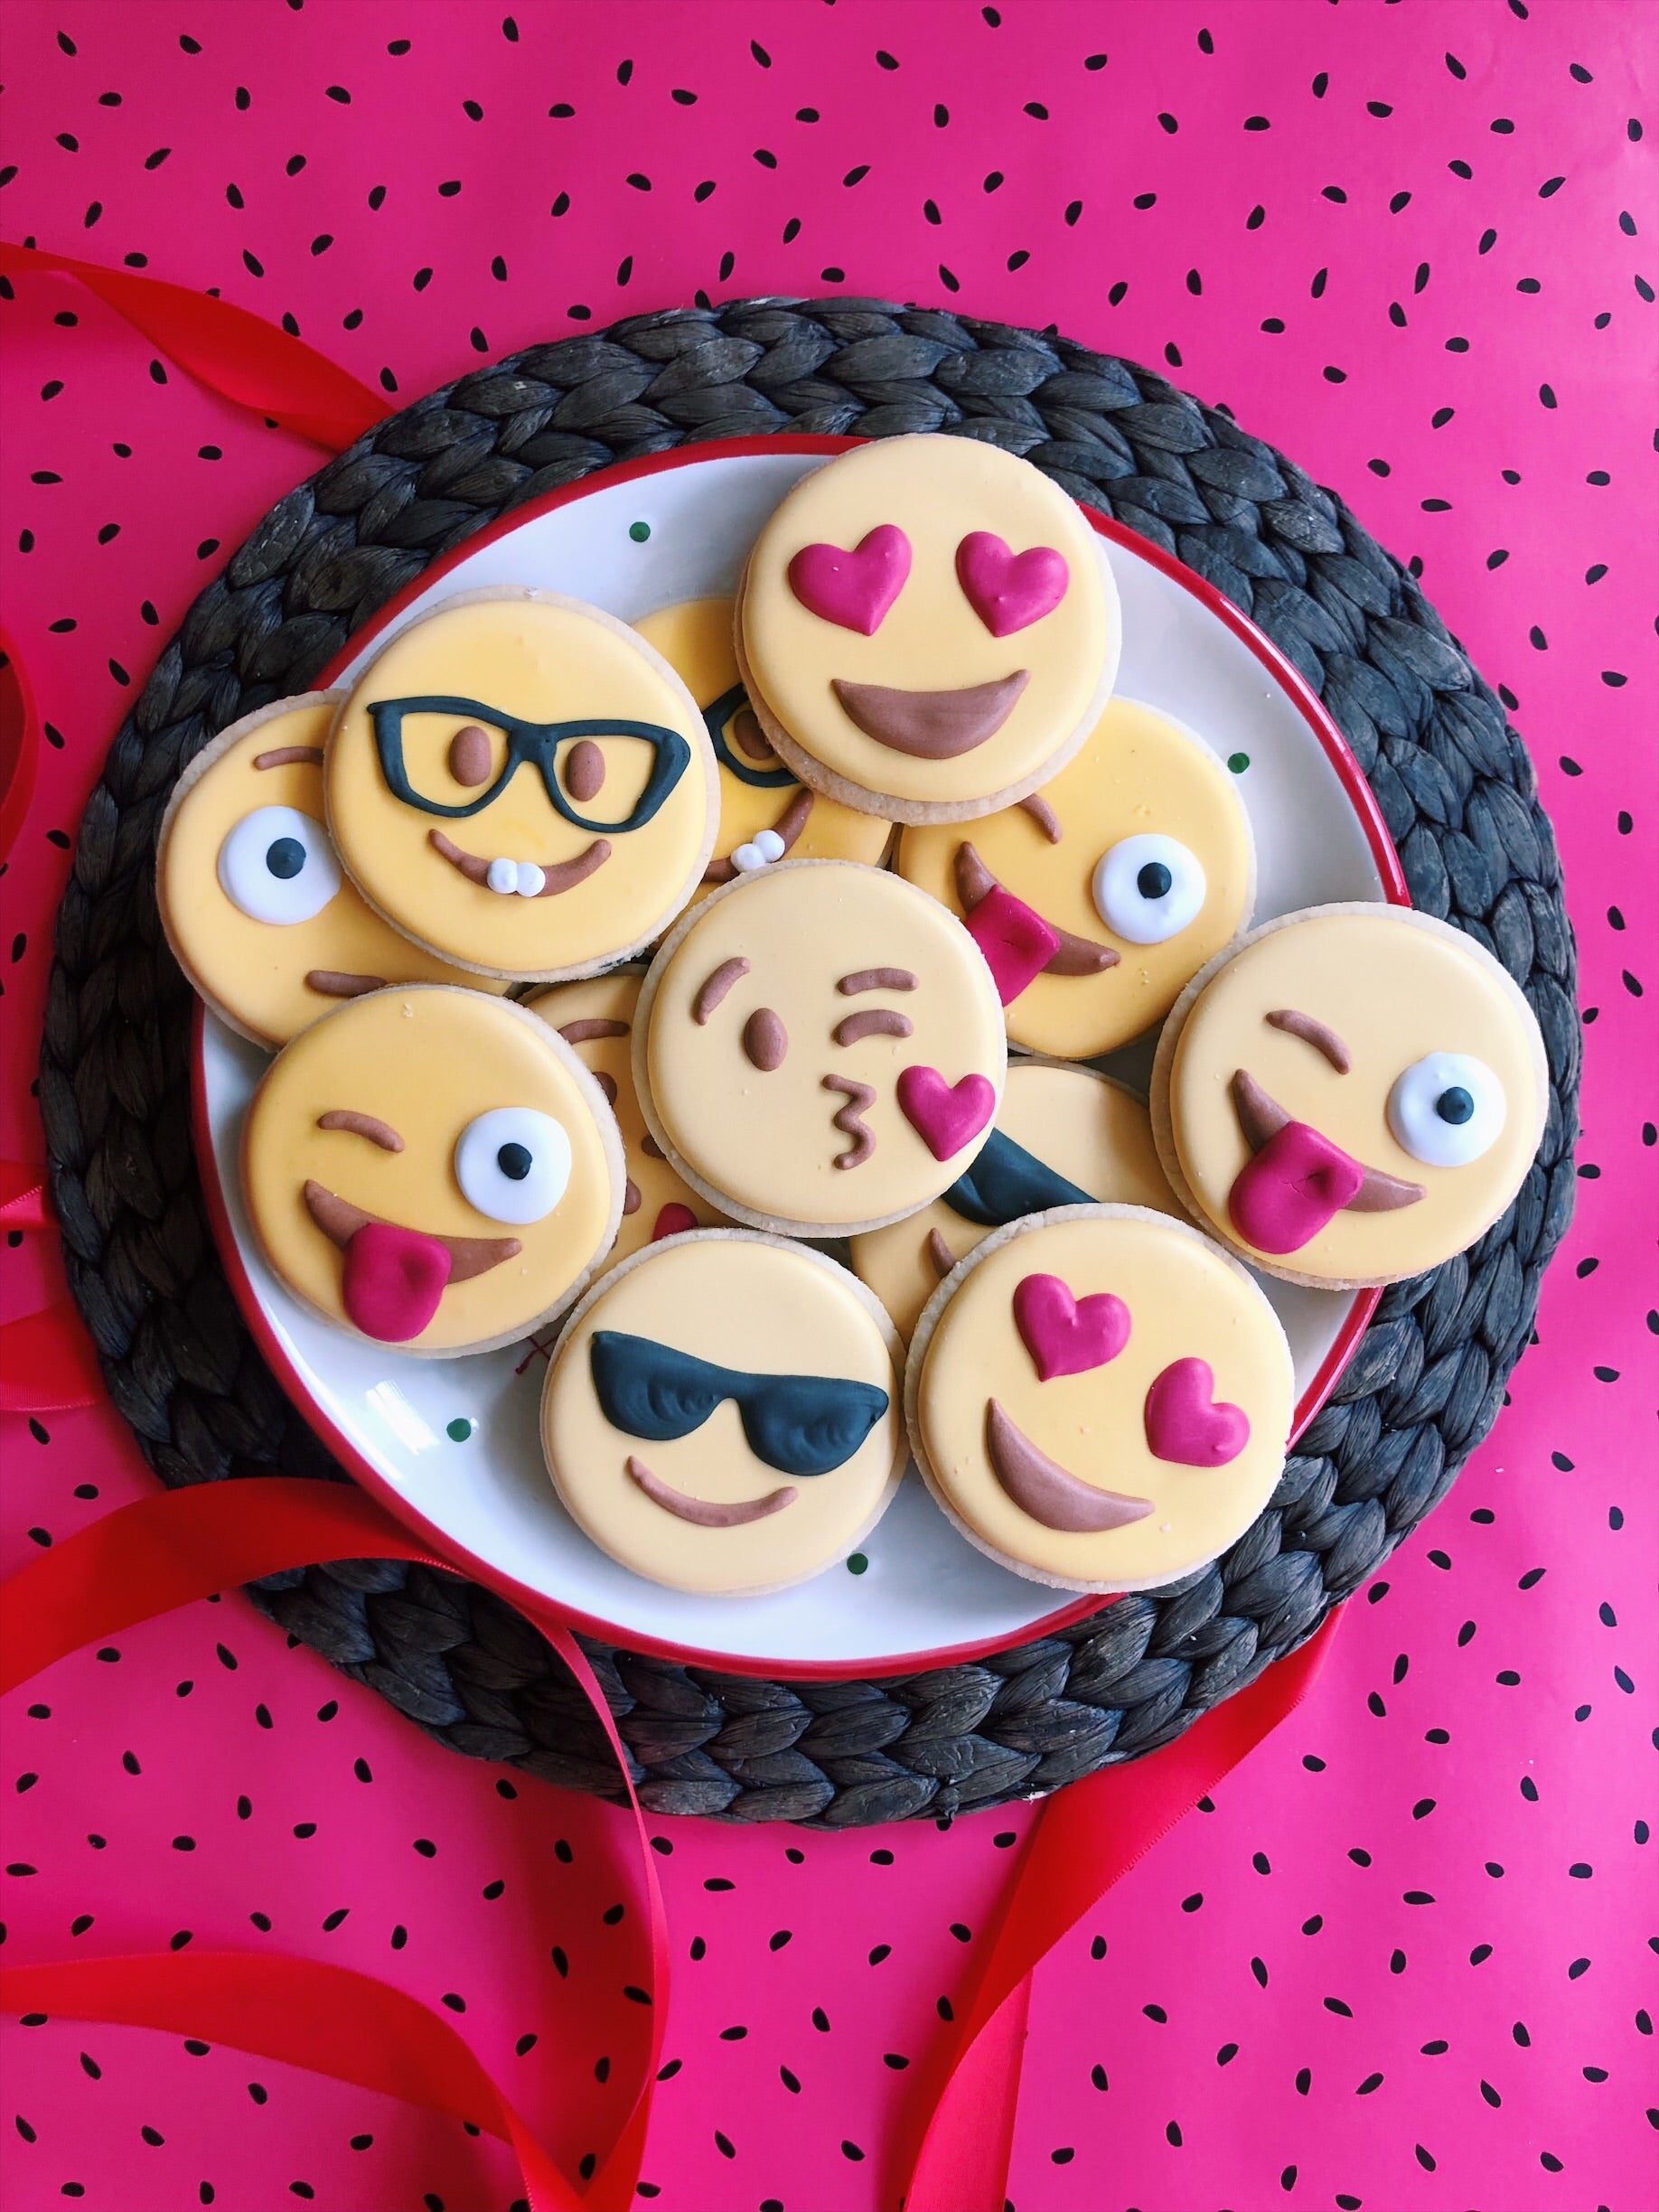 Angry Face Cute and Funny Editable Colors Emoji Sugar Cookie